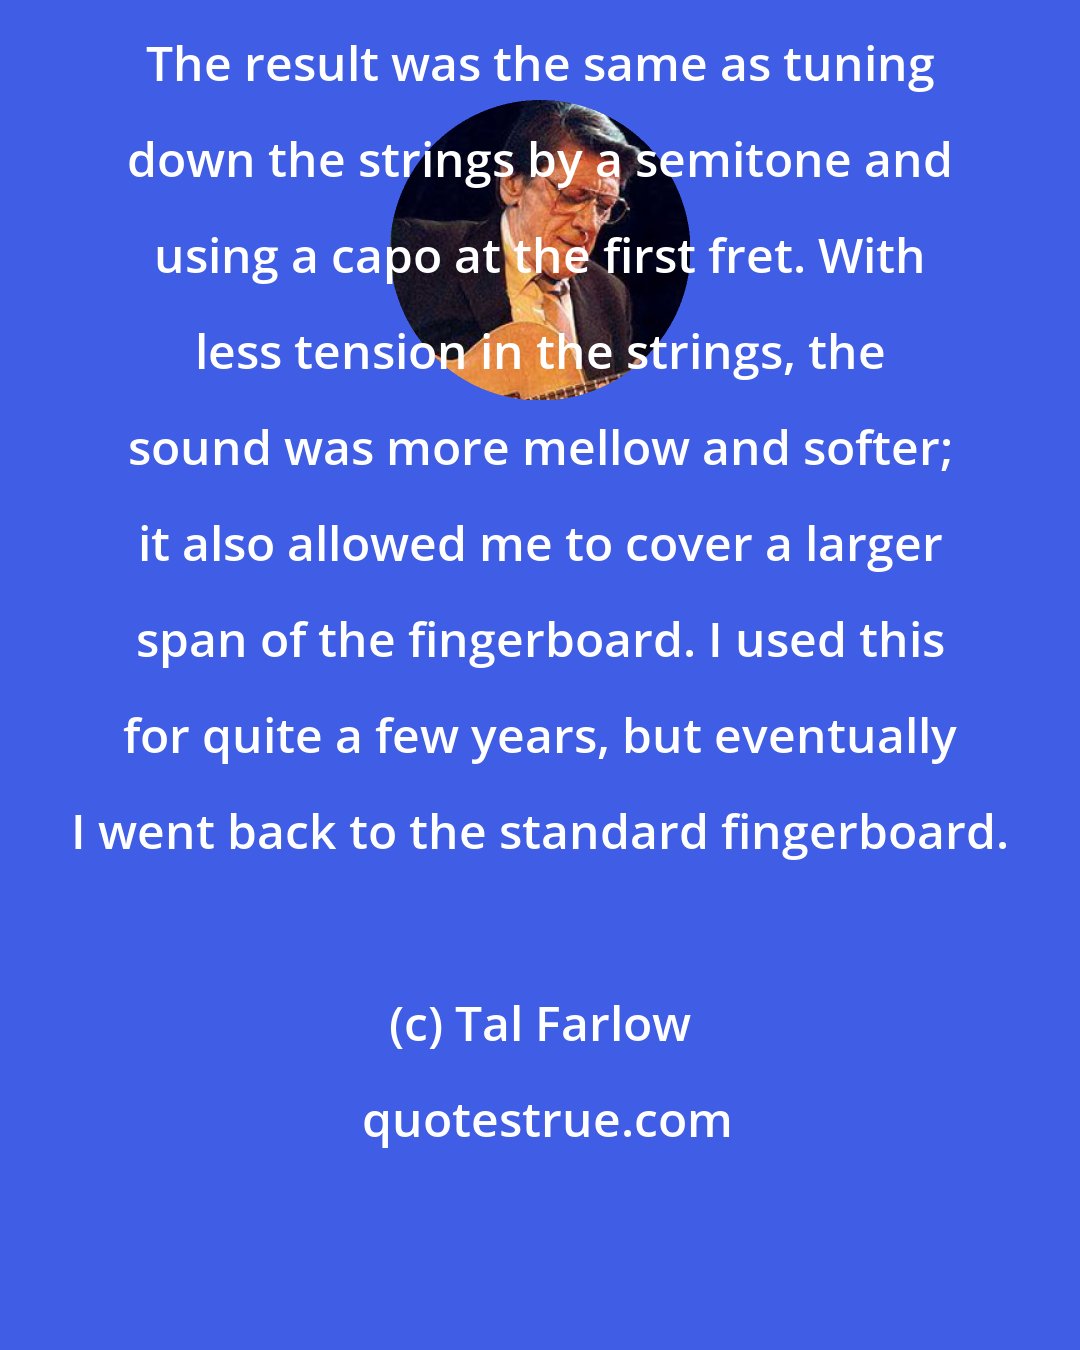 Tal Farlow: The result was the same as tuning down the strings by a semitone and using a capo at the first fret. With less tension in the strings, the sound was more mellow and softer; it also allowed me to cover a larger span of the fingerboard. I used this for quite a few years, but eventually I went back to the standard fingerboard.